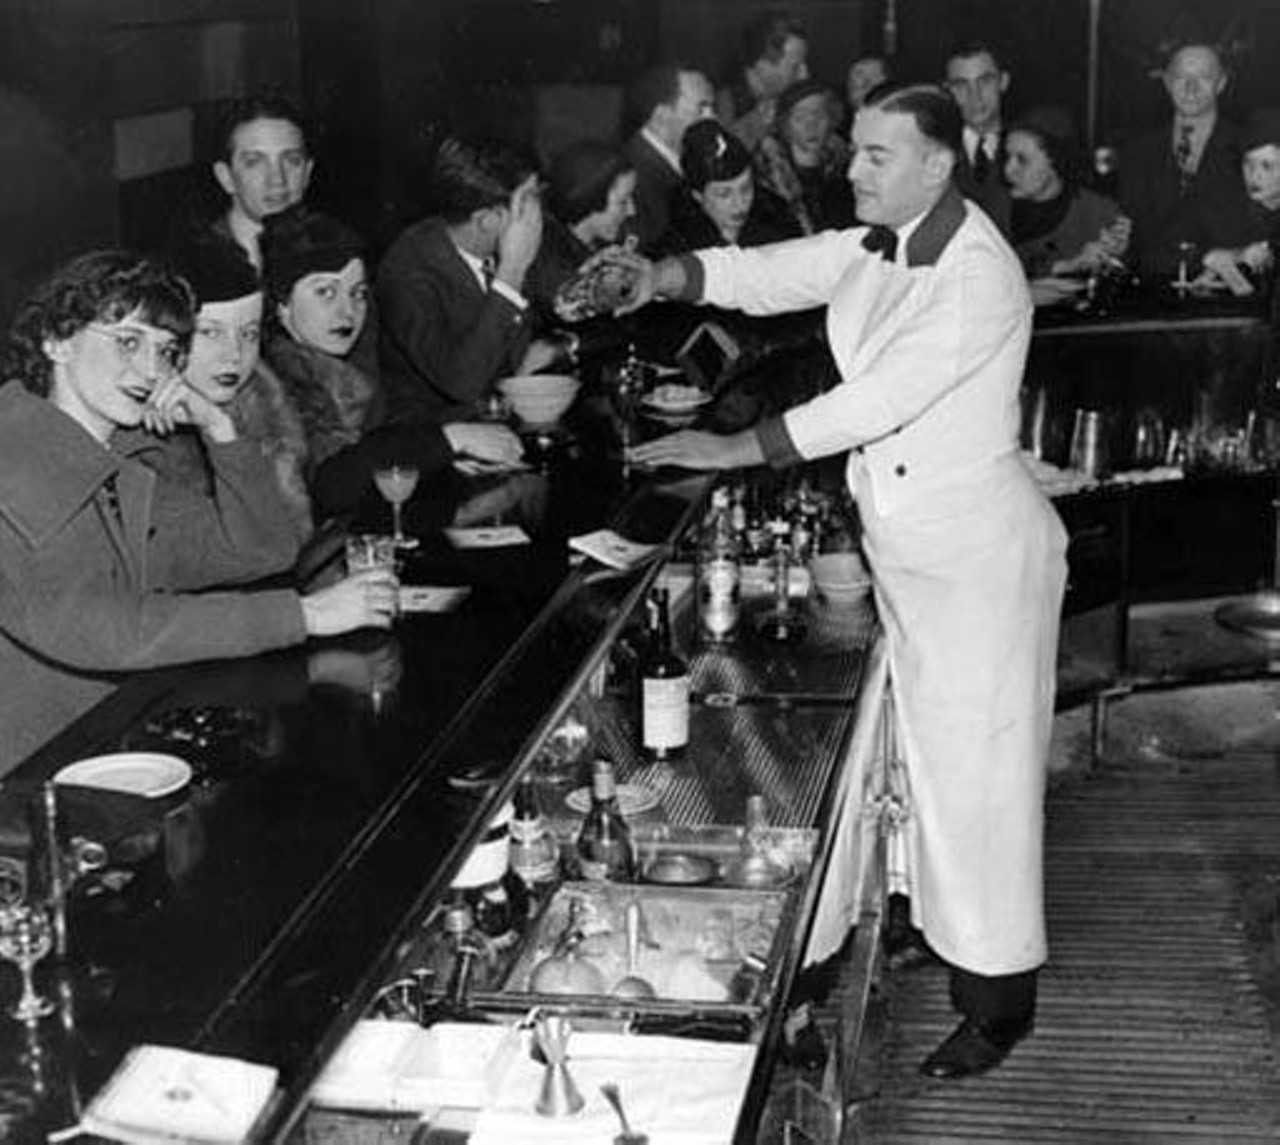 Bartender serves up specials at the Mayfair Casino bar. Here, folks could partake in the Five O'Clock Penny Club special -- a version of "happy hour" where patrons could order up drinks for a penny,  1937.